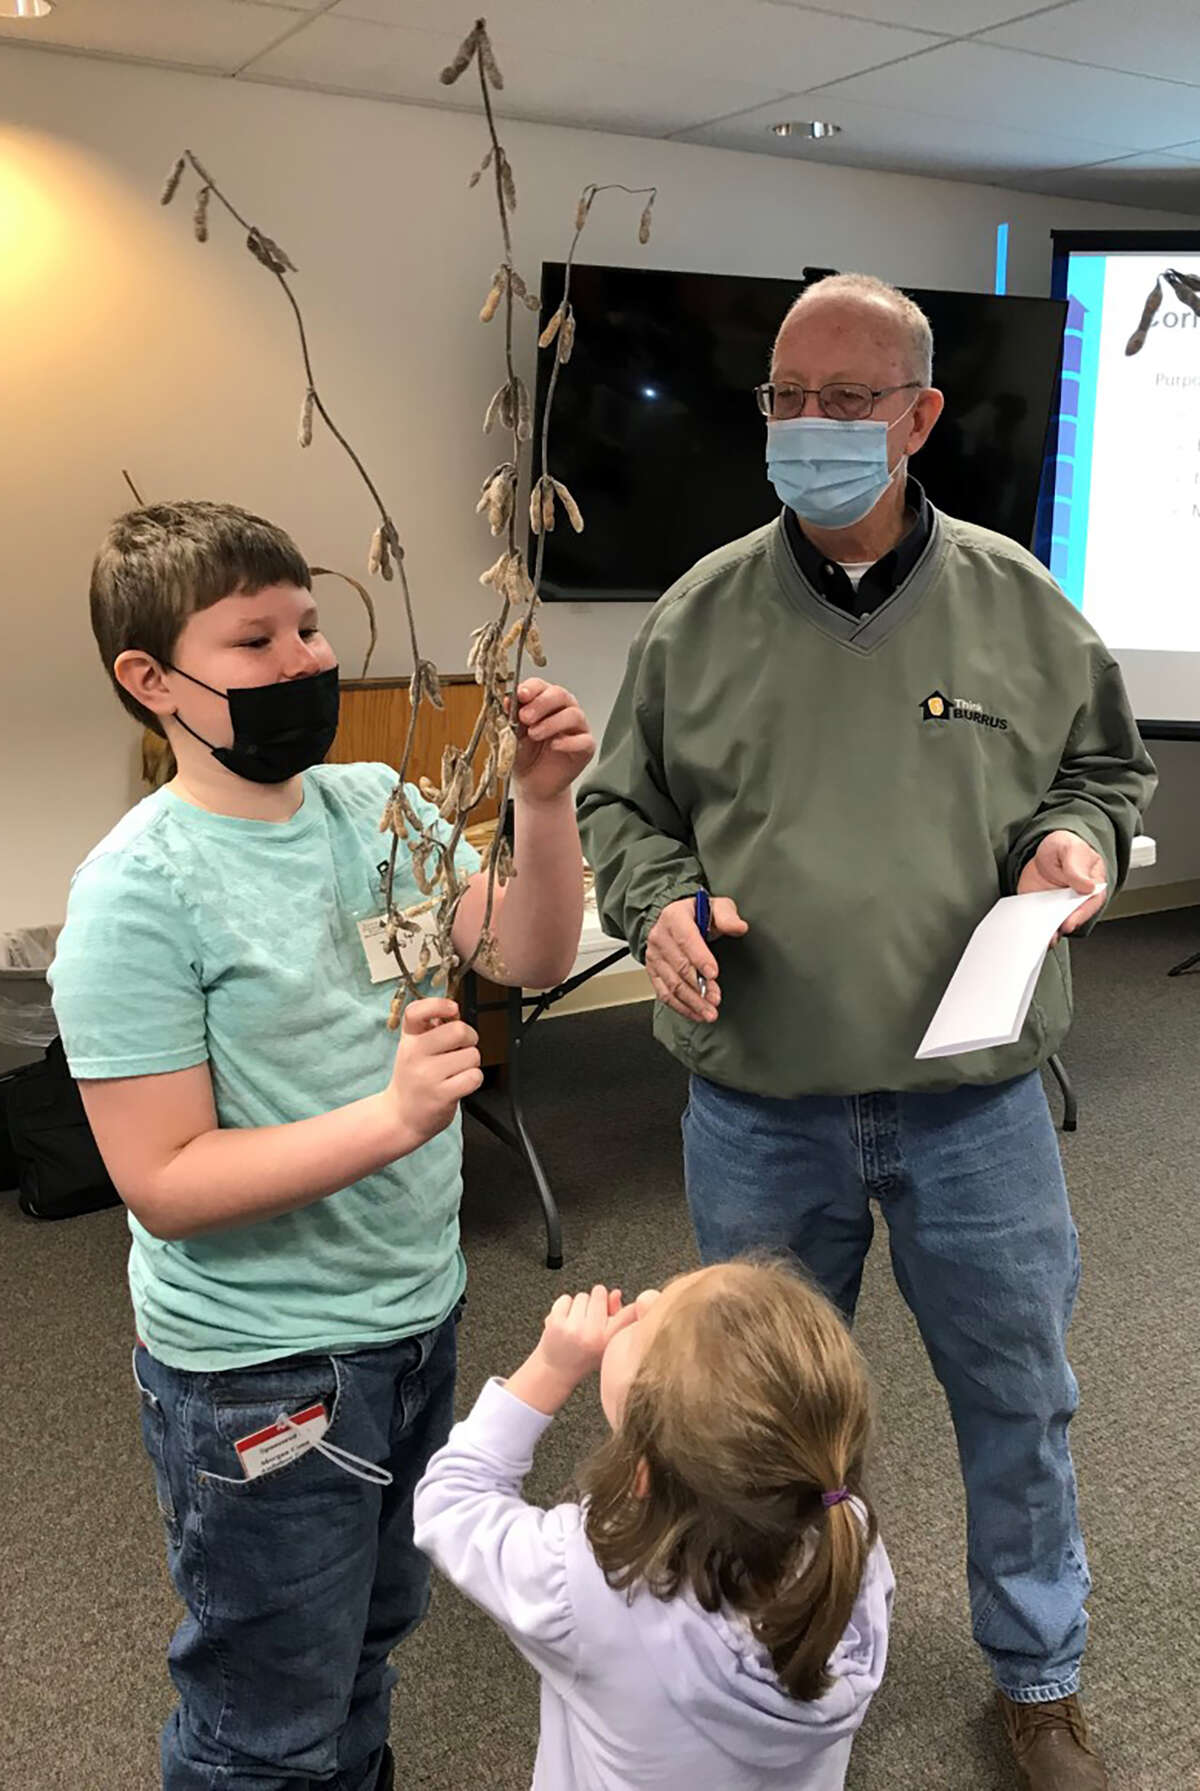 Members of the Young Explorers Club learn about crops during the club's Feb. 26 meeting at Jacksonville Public Library. Todd Burrus of Burrus Seed Farms Inc. was the speaker.